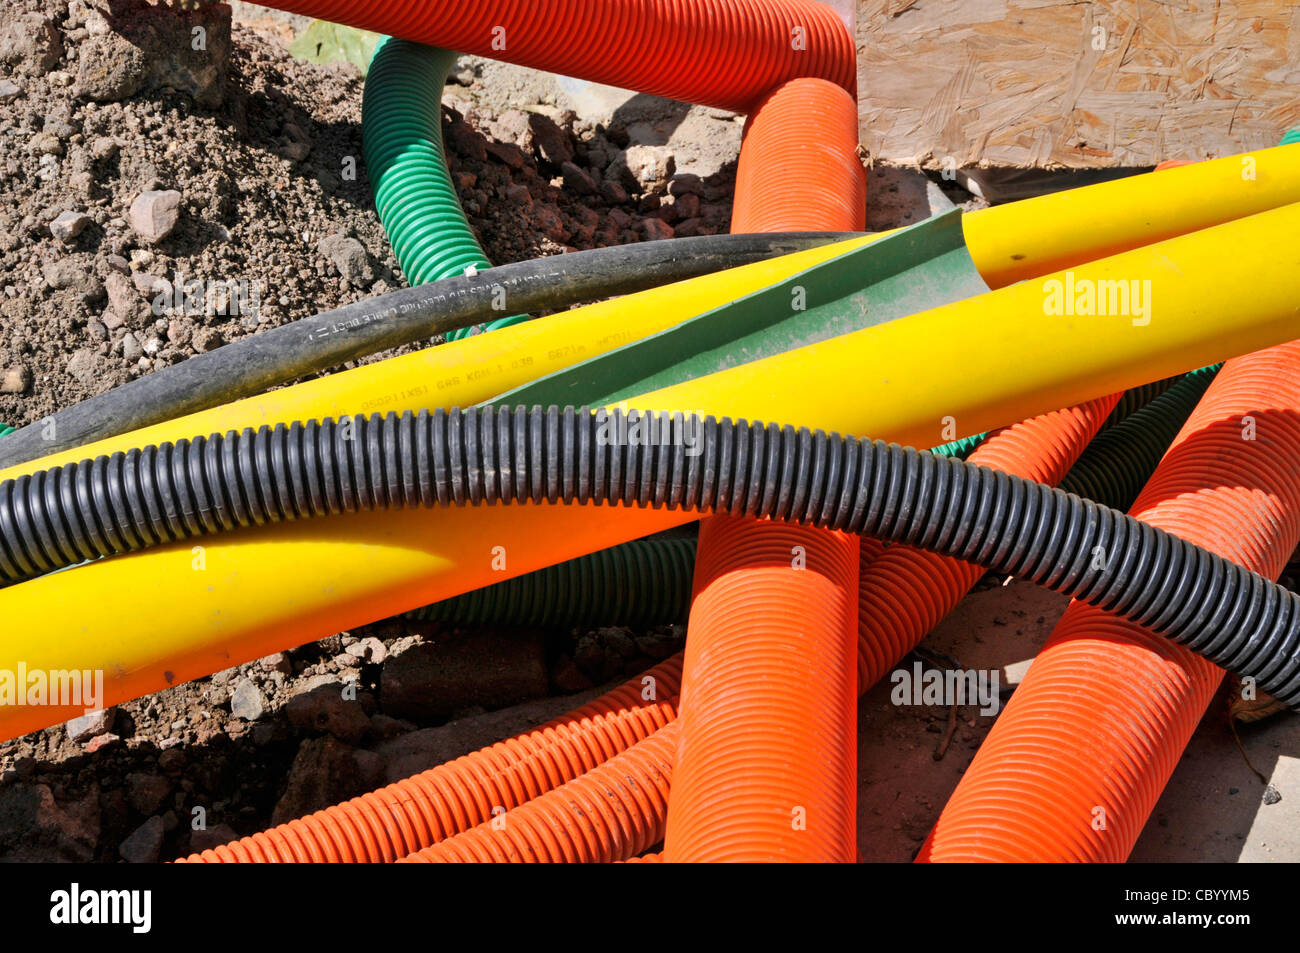 Street scene road works jumbled heap of assorted colourful plastic tubing offcuts for underground utility services gas electricity London England UK Stock Photo